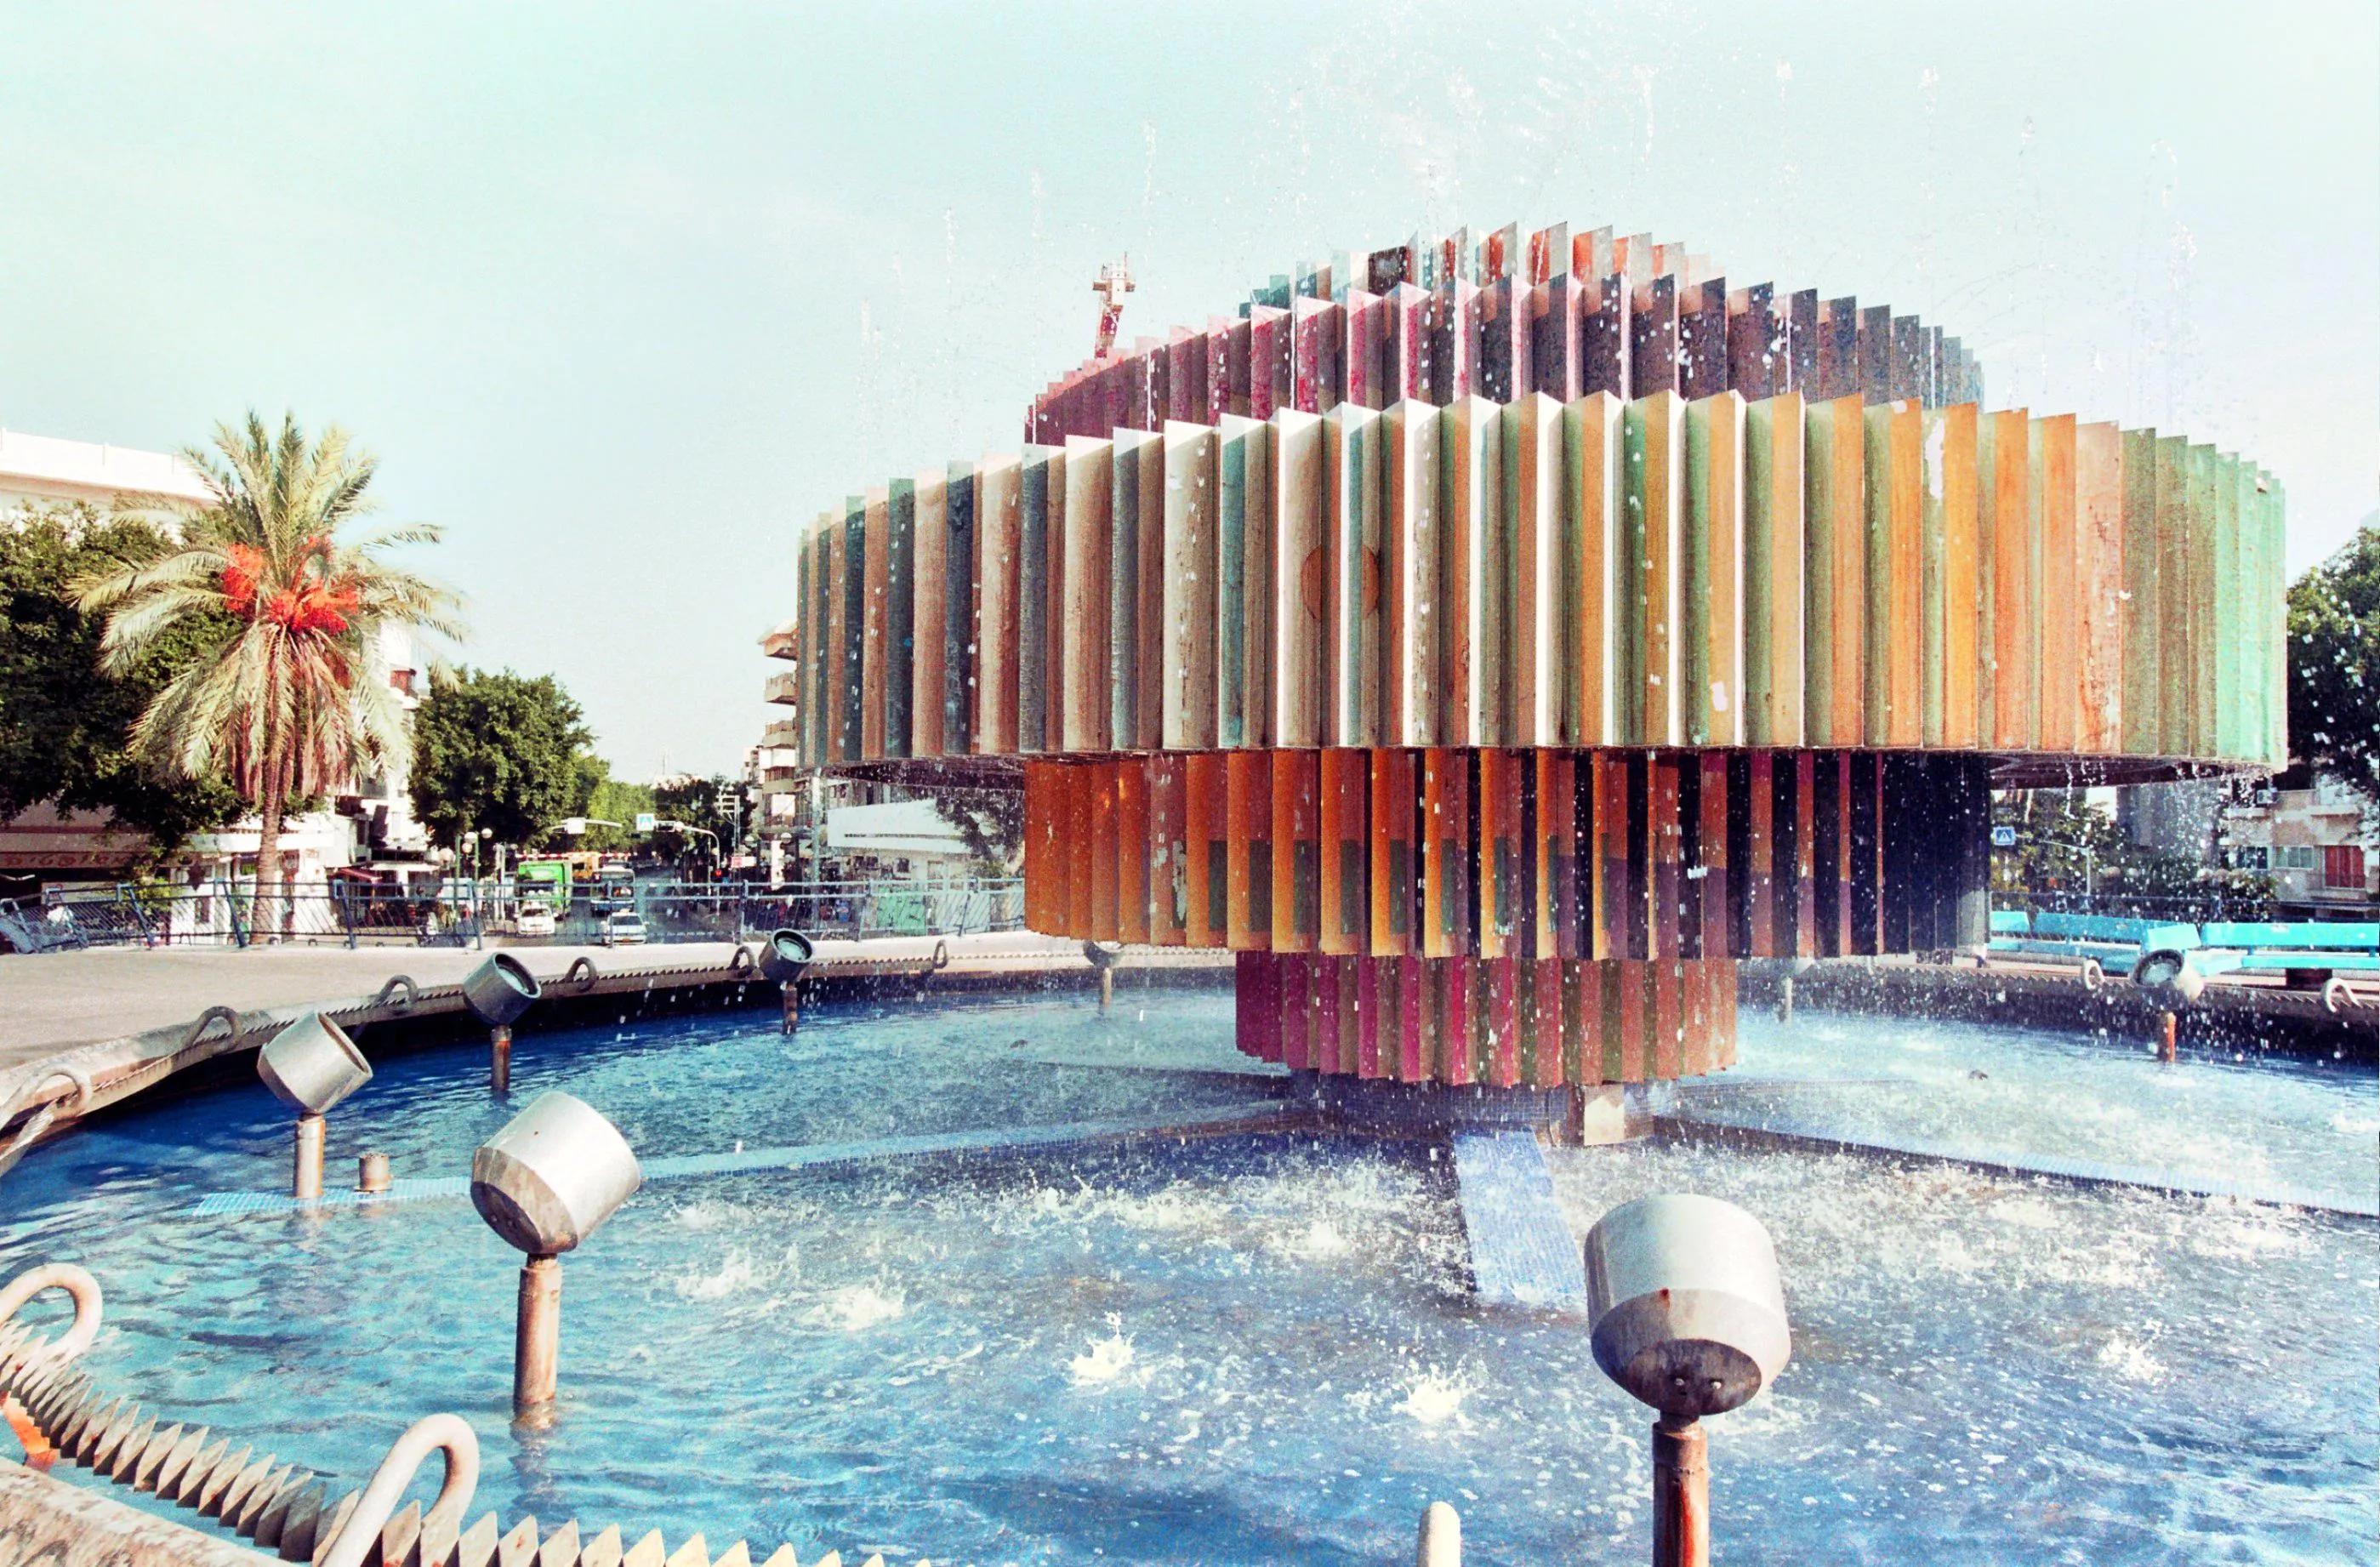 Dizengoff Fountain in Israel, Middle East | Architecture,Monuments - Rated 3.6